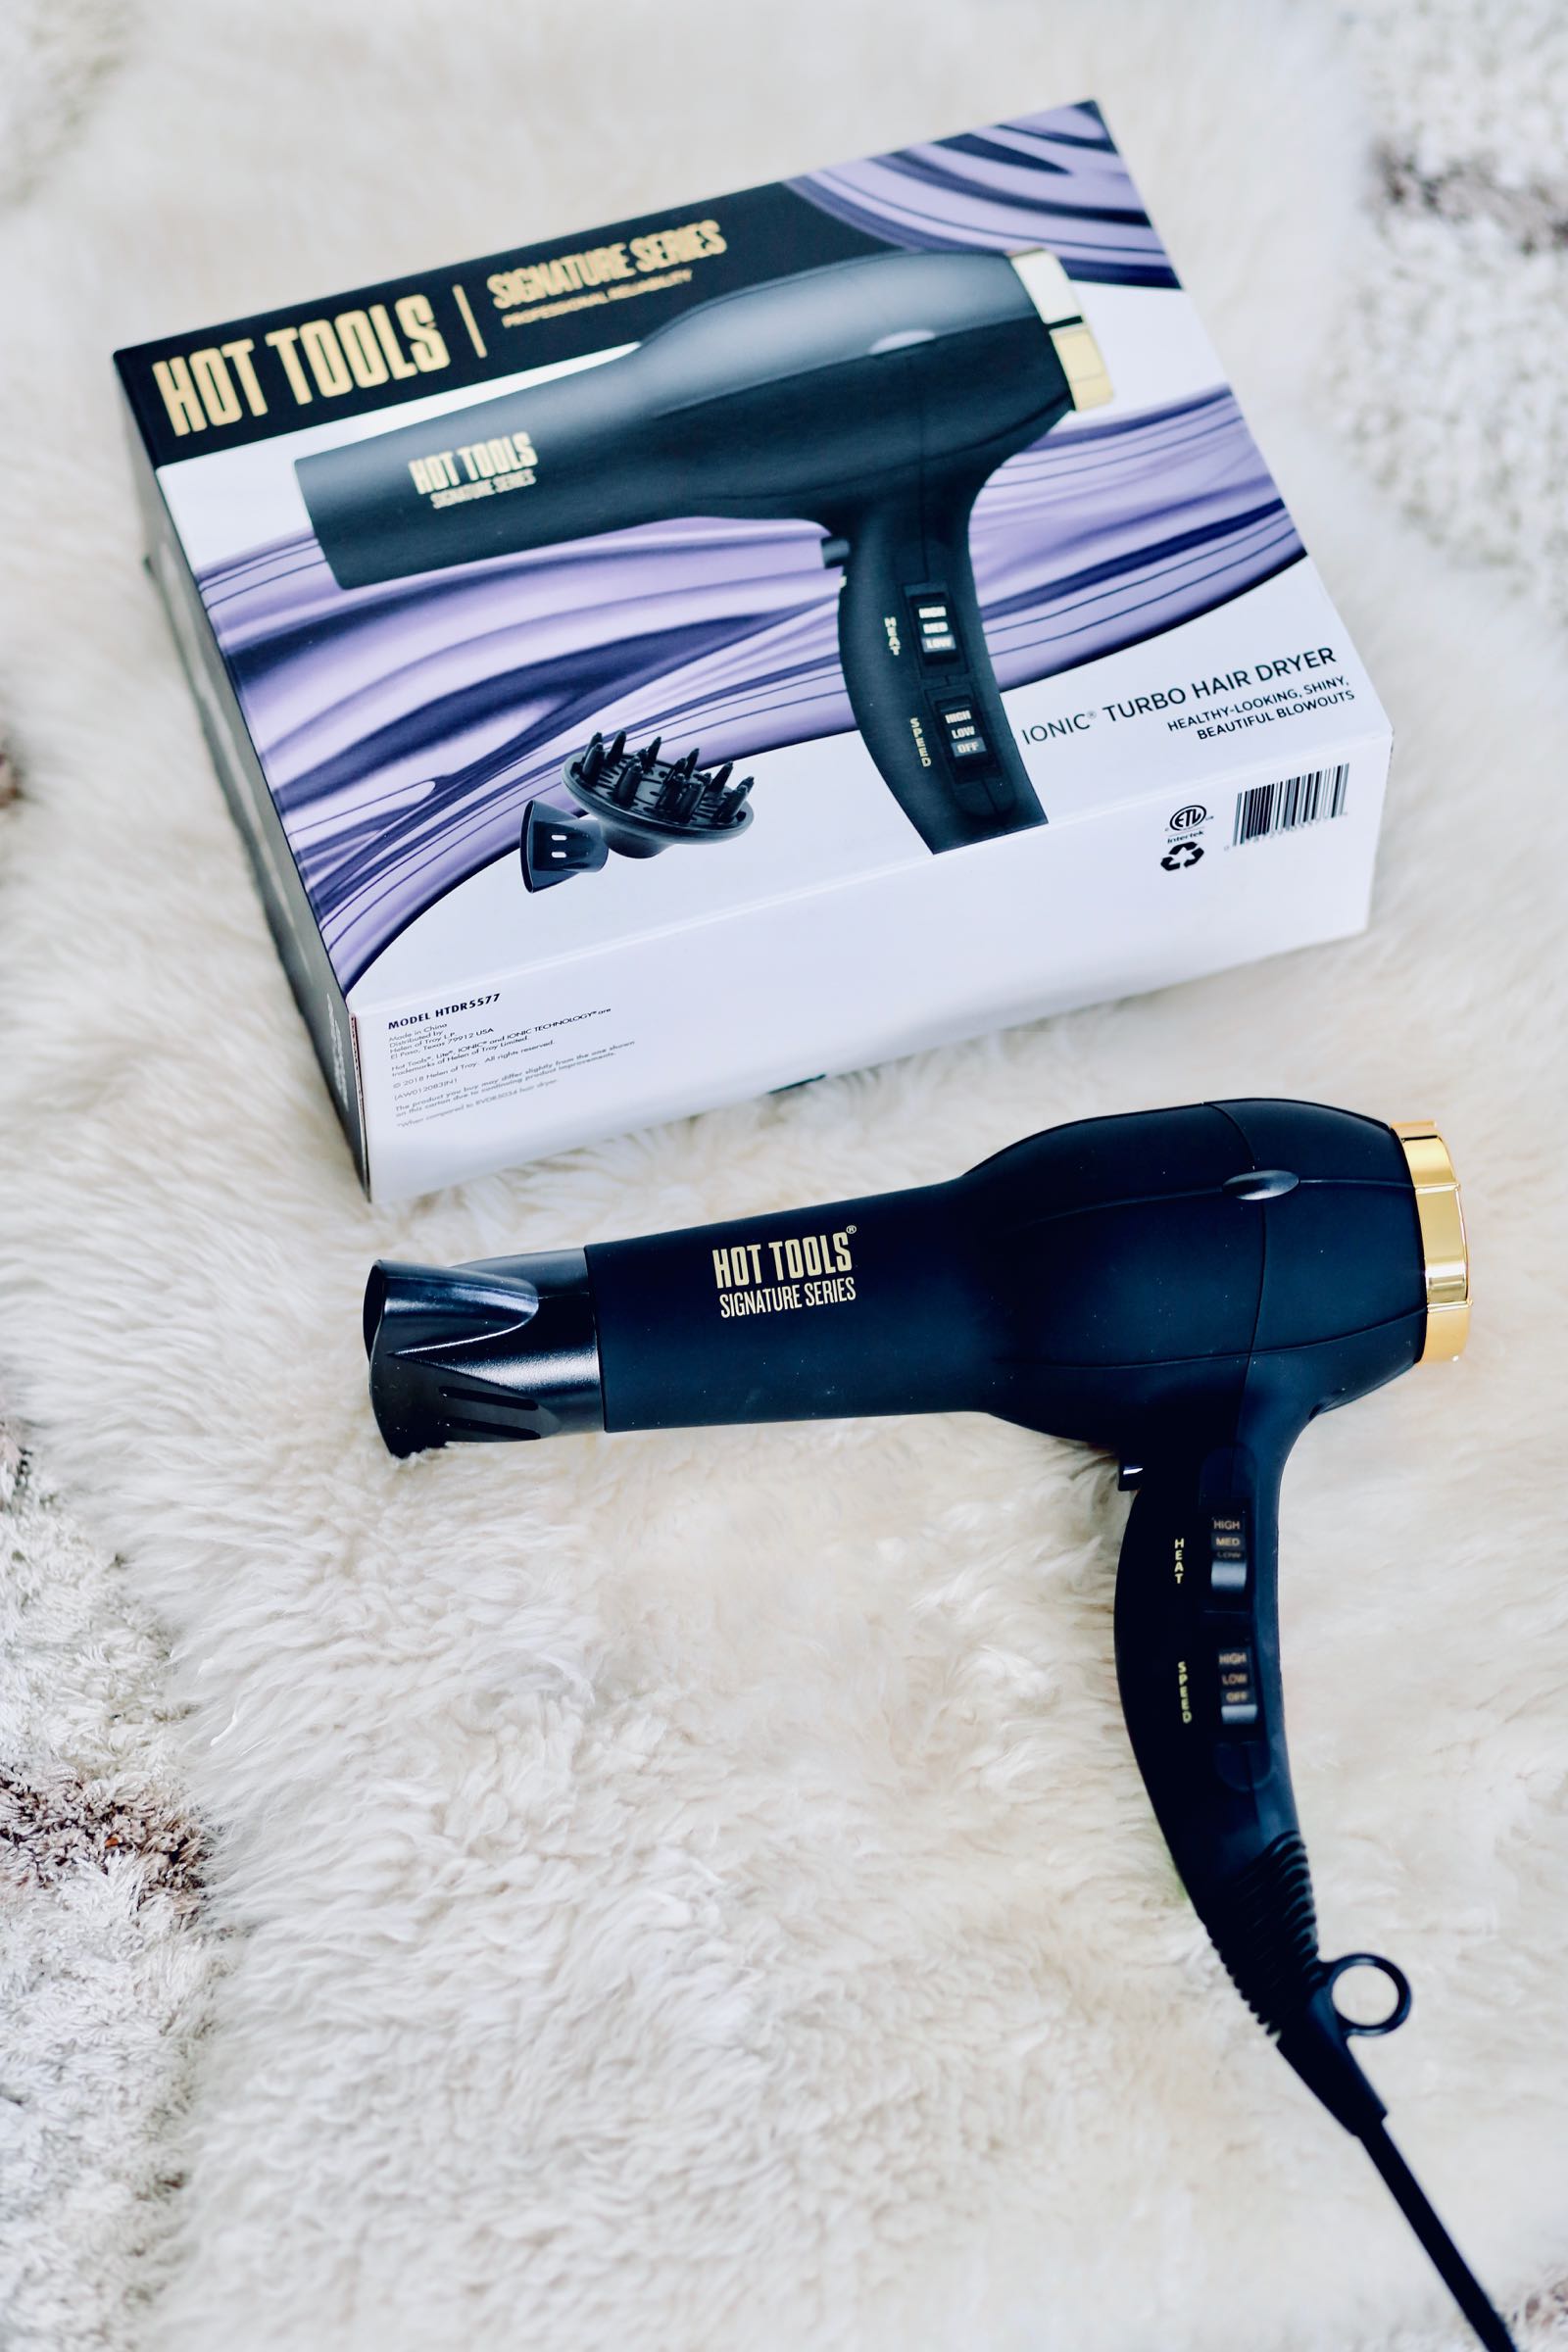 Hot Tools Signature Series blow dryer review - bookmarking this one!